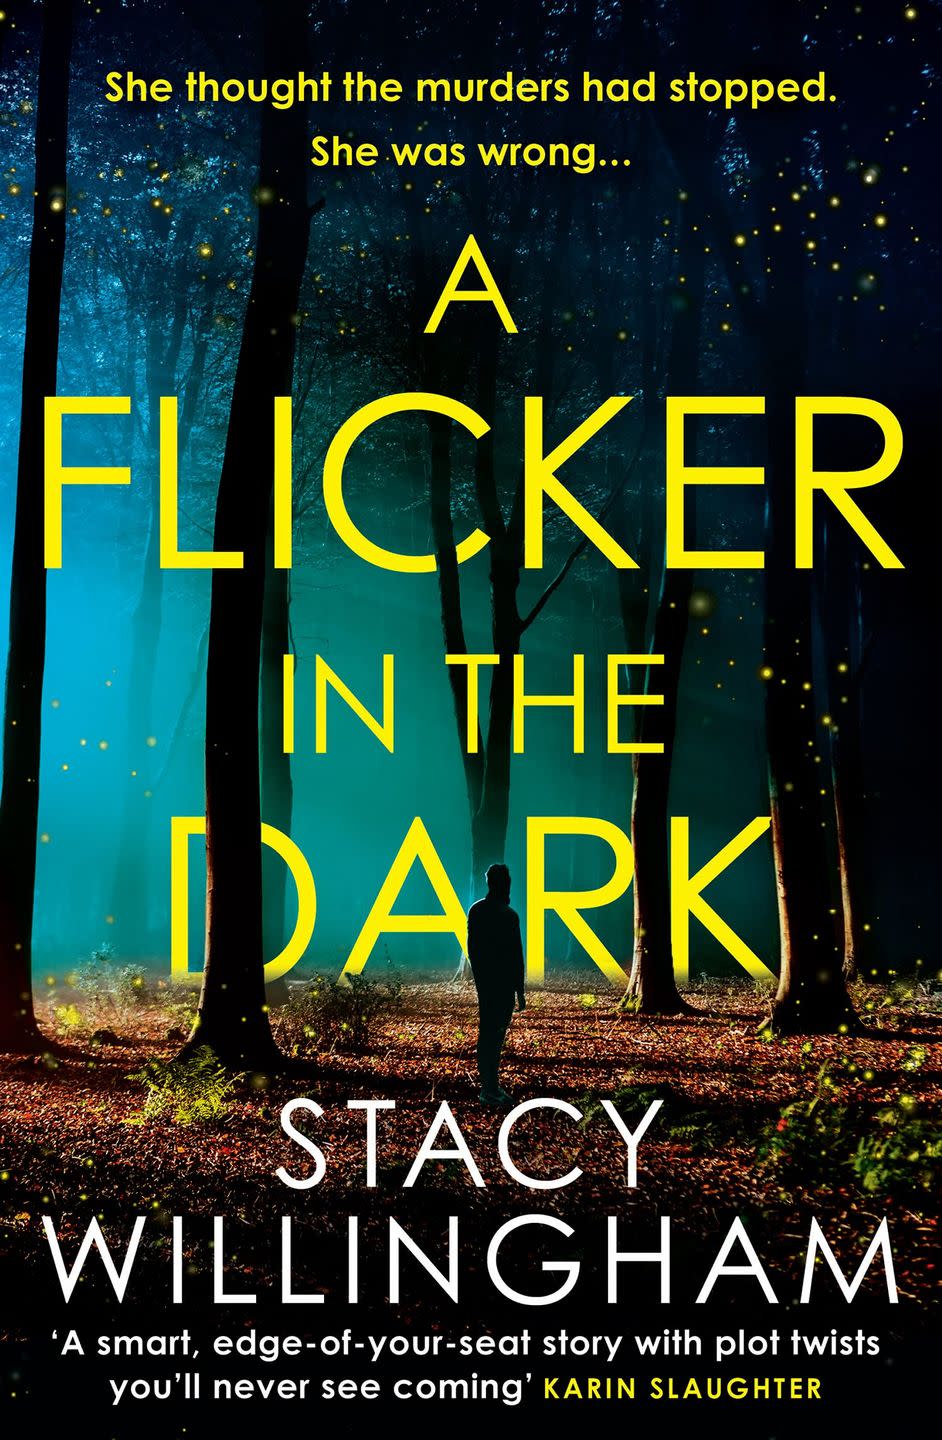 'A Flicker in the Dark' by Stacy Willingham